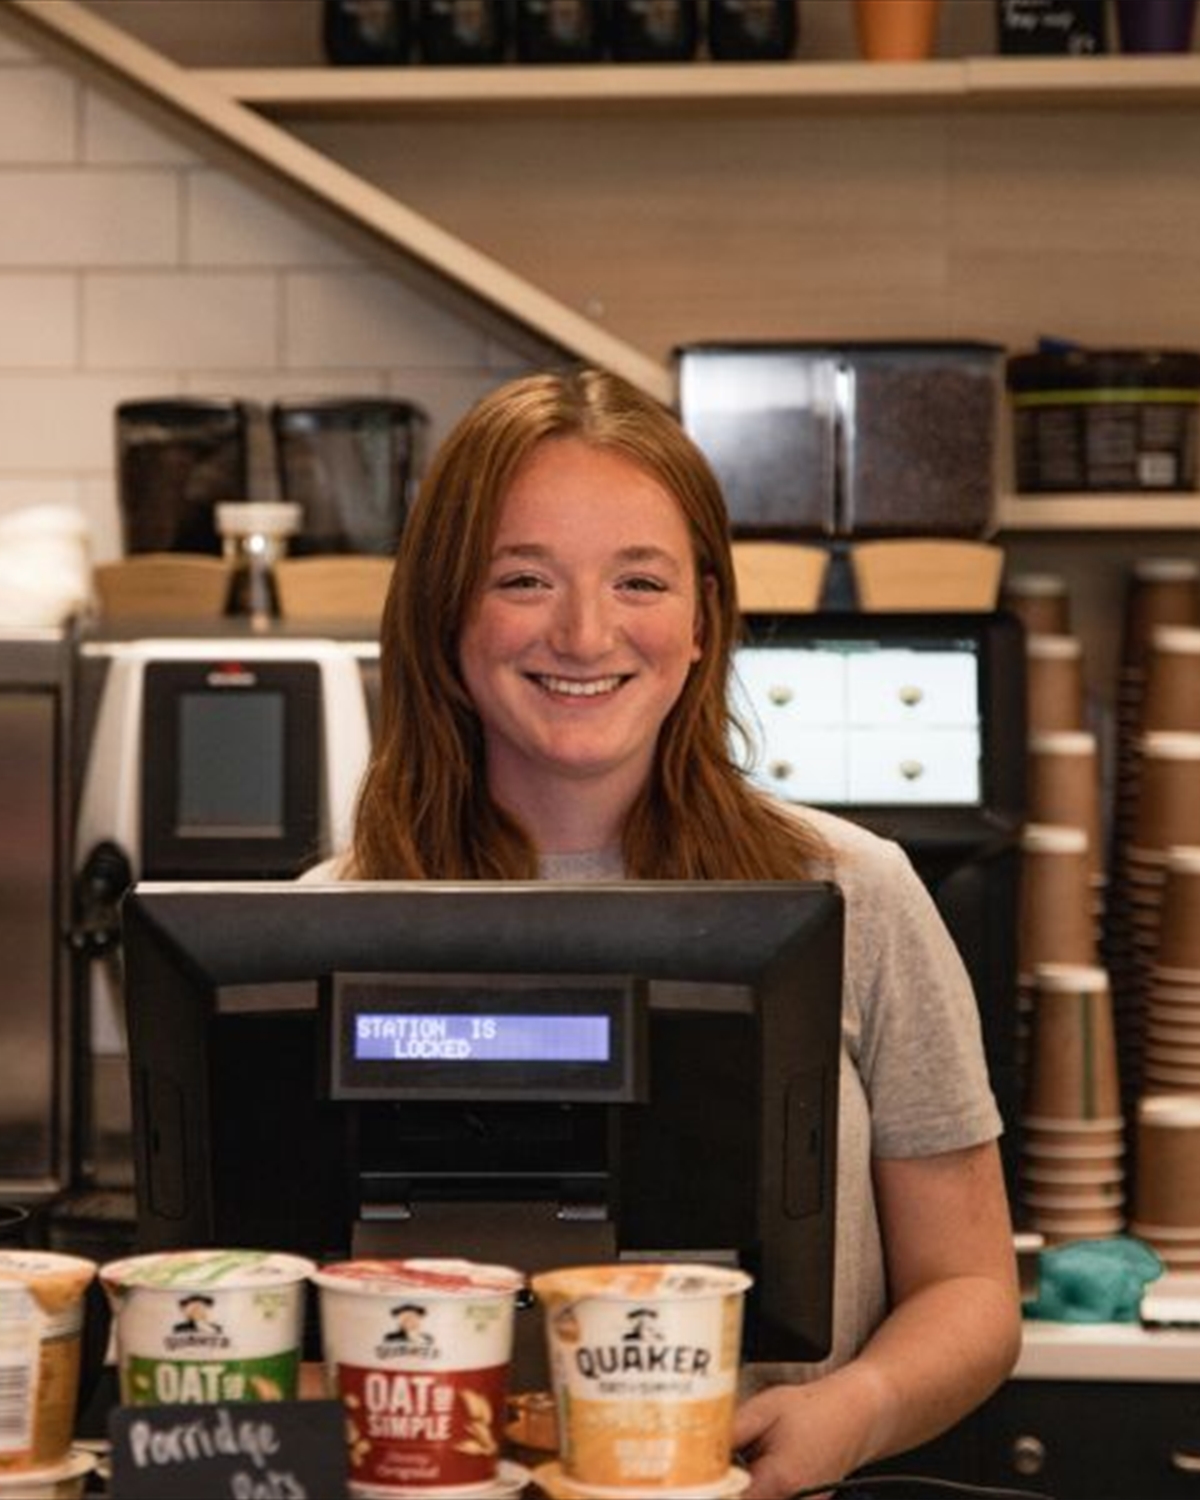 Staff member smiling and serving at till in Common Ground